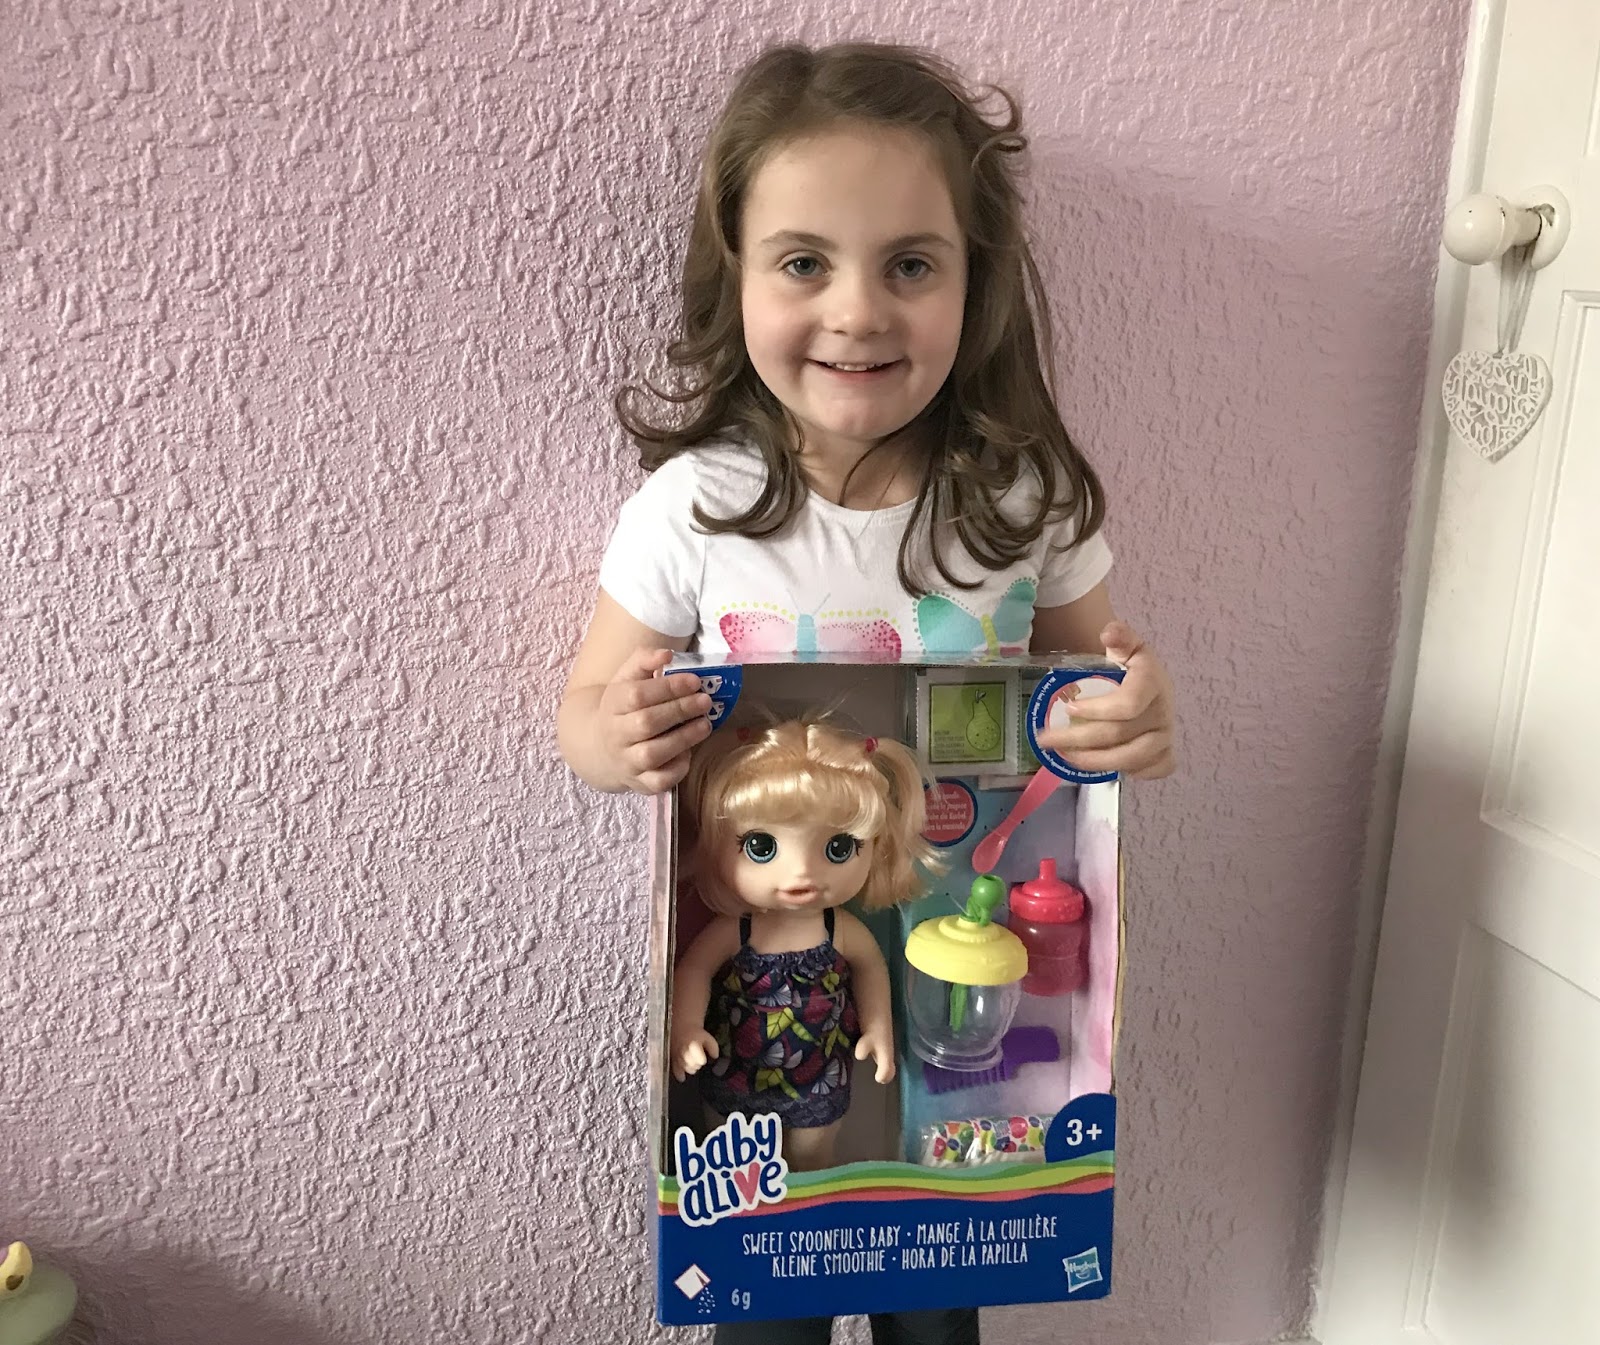 Baby Alive Spoonfuls Doll Review | Newcastle Family Life